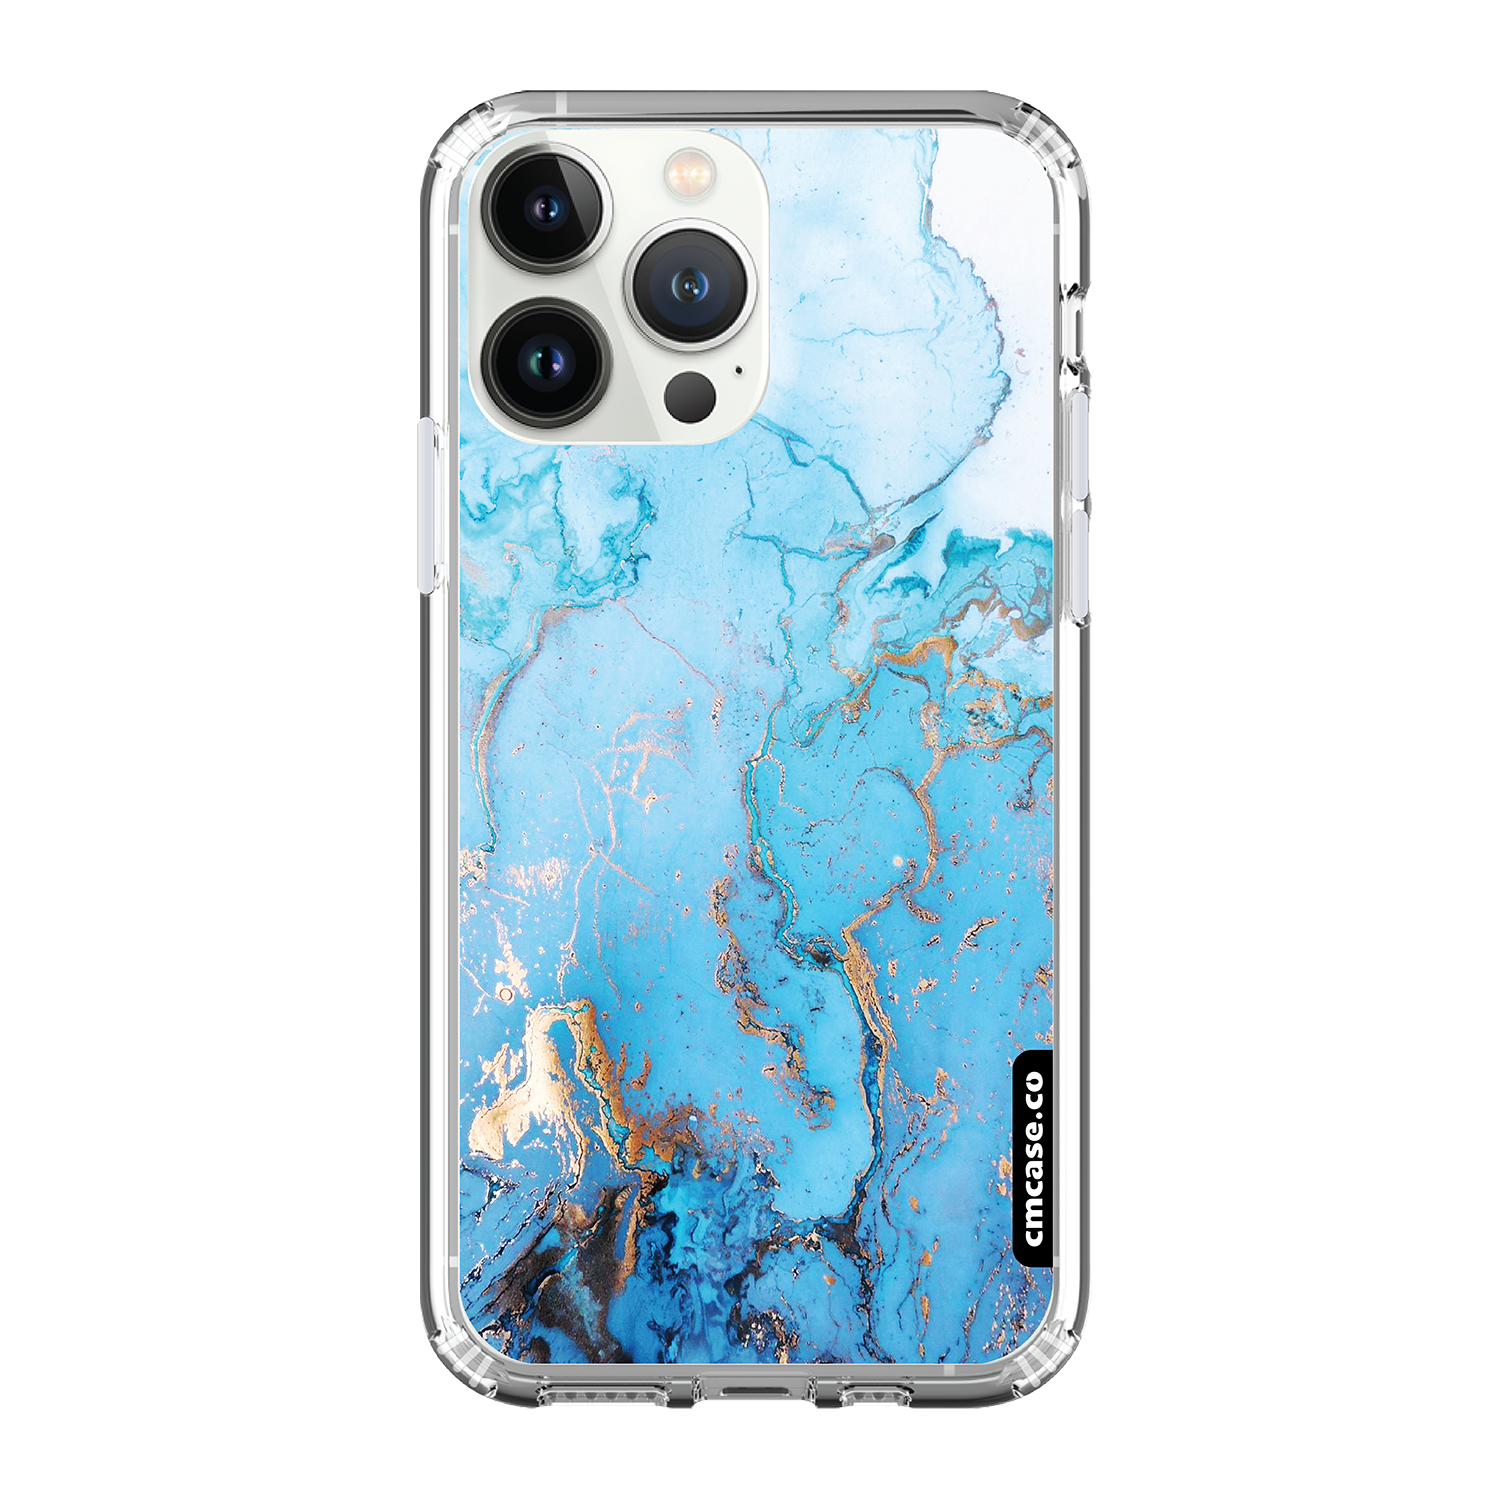 CMCase Clear Case / iPhone Case / Android Case / Samsung Case 正版授權 全包邊氣囊防撞手機殼 (3804)